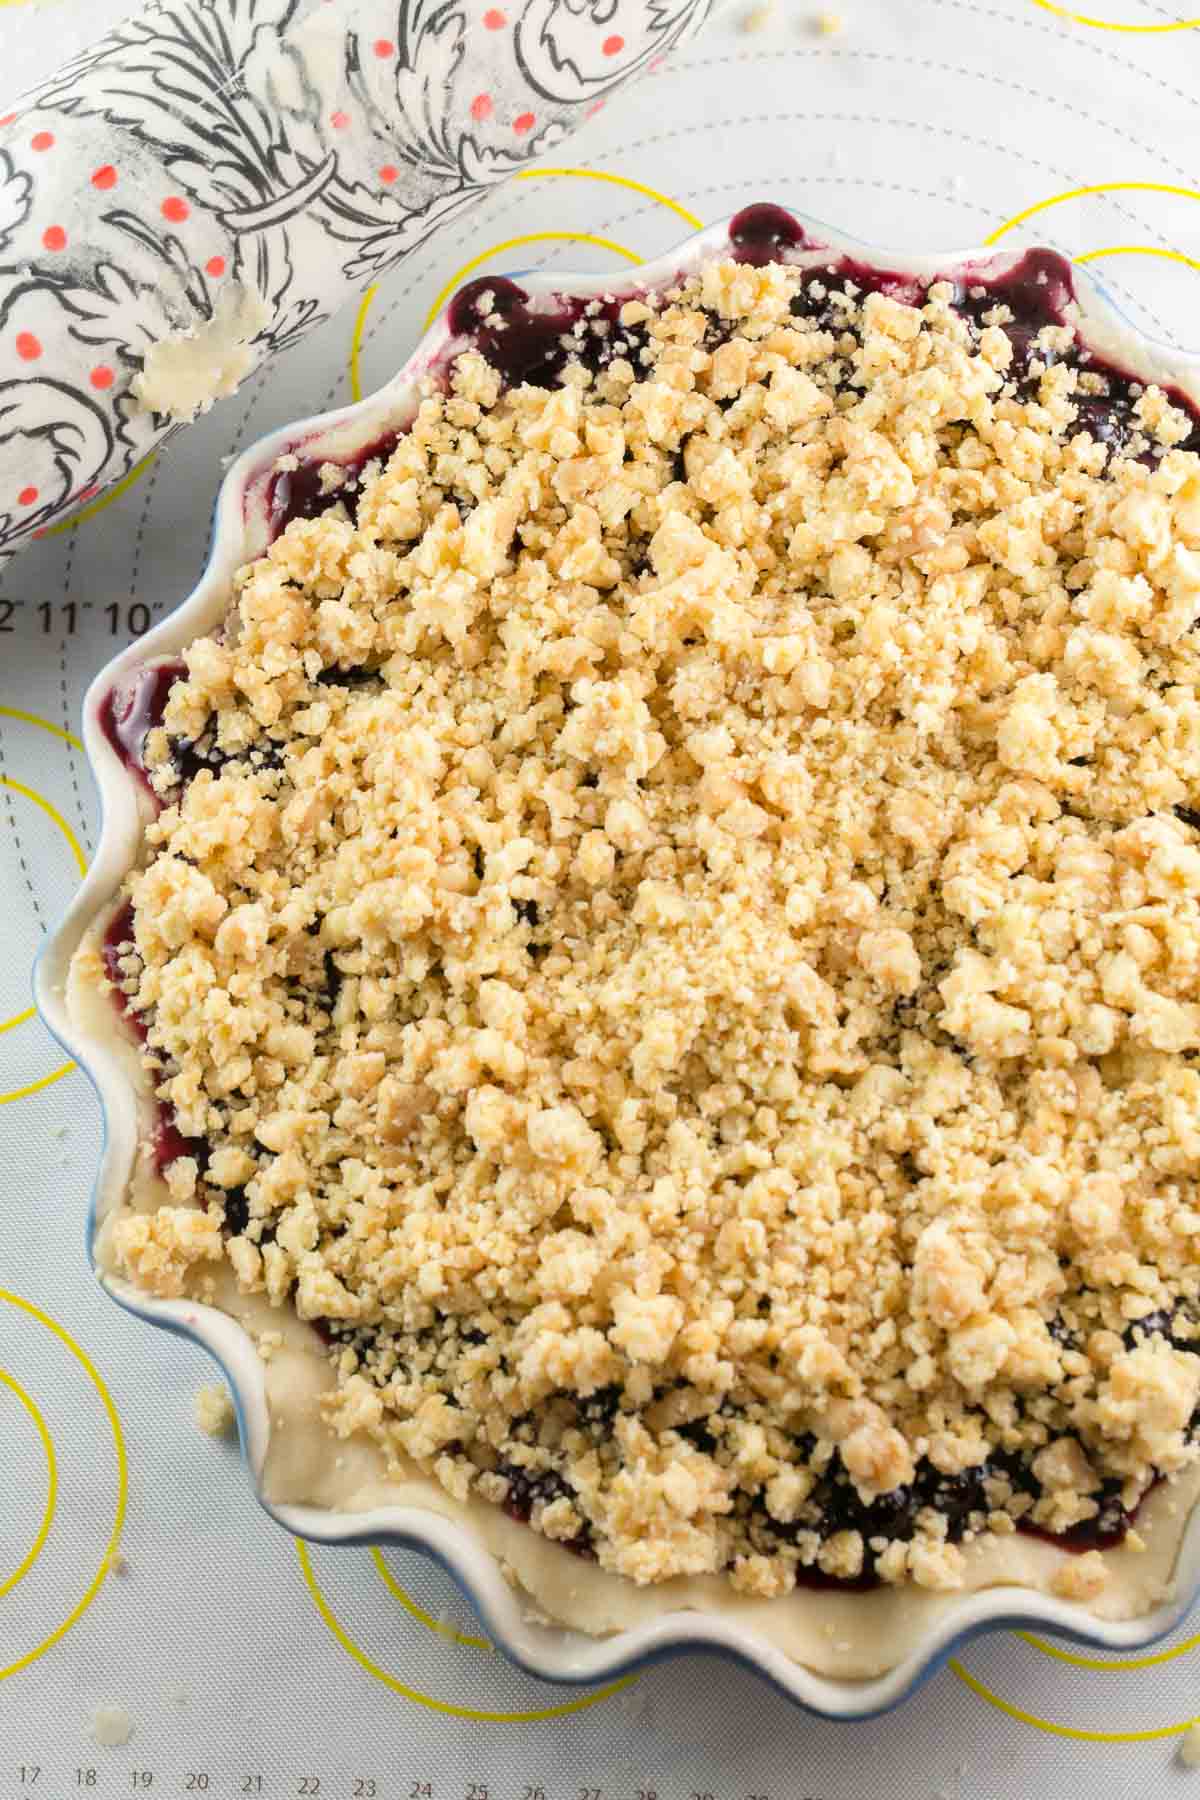 unbaked blueberry pie topped with a buttery almond crumble